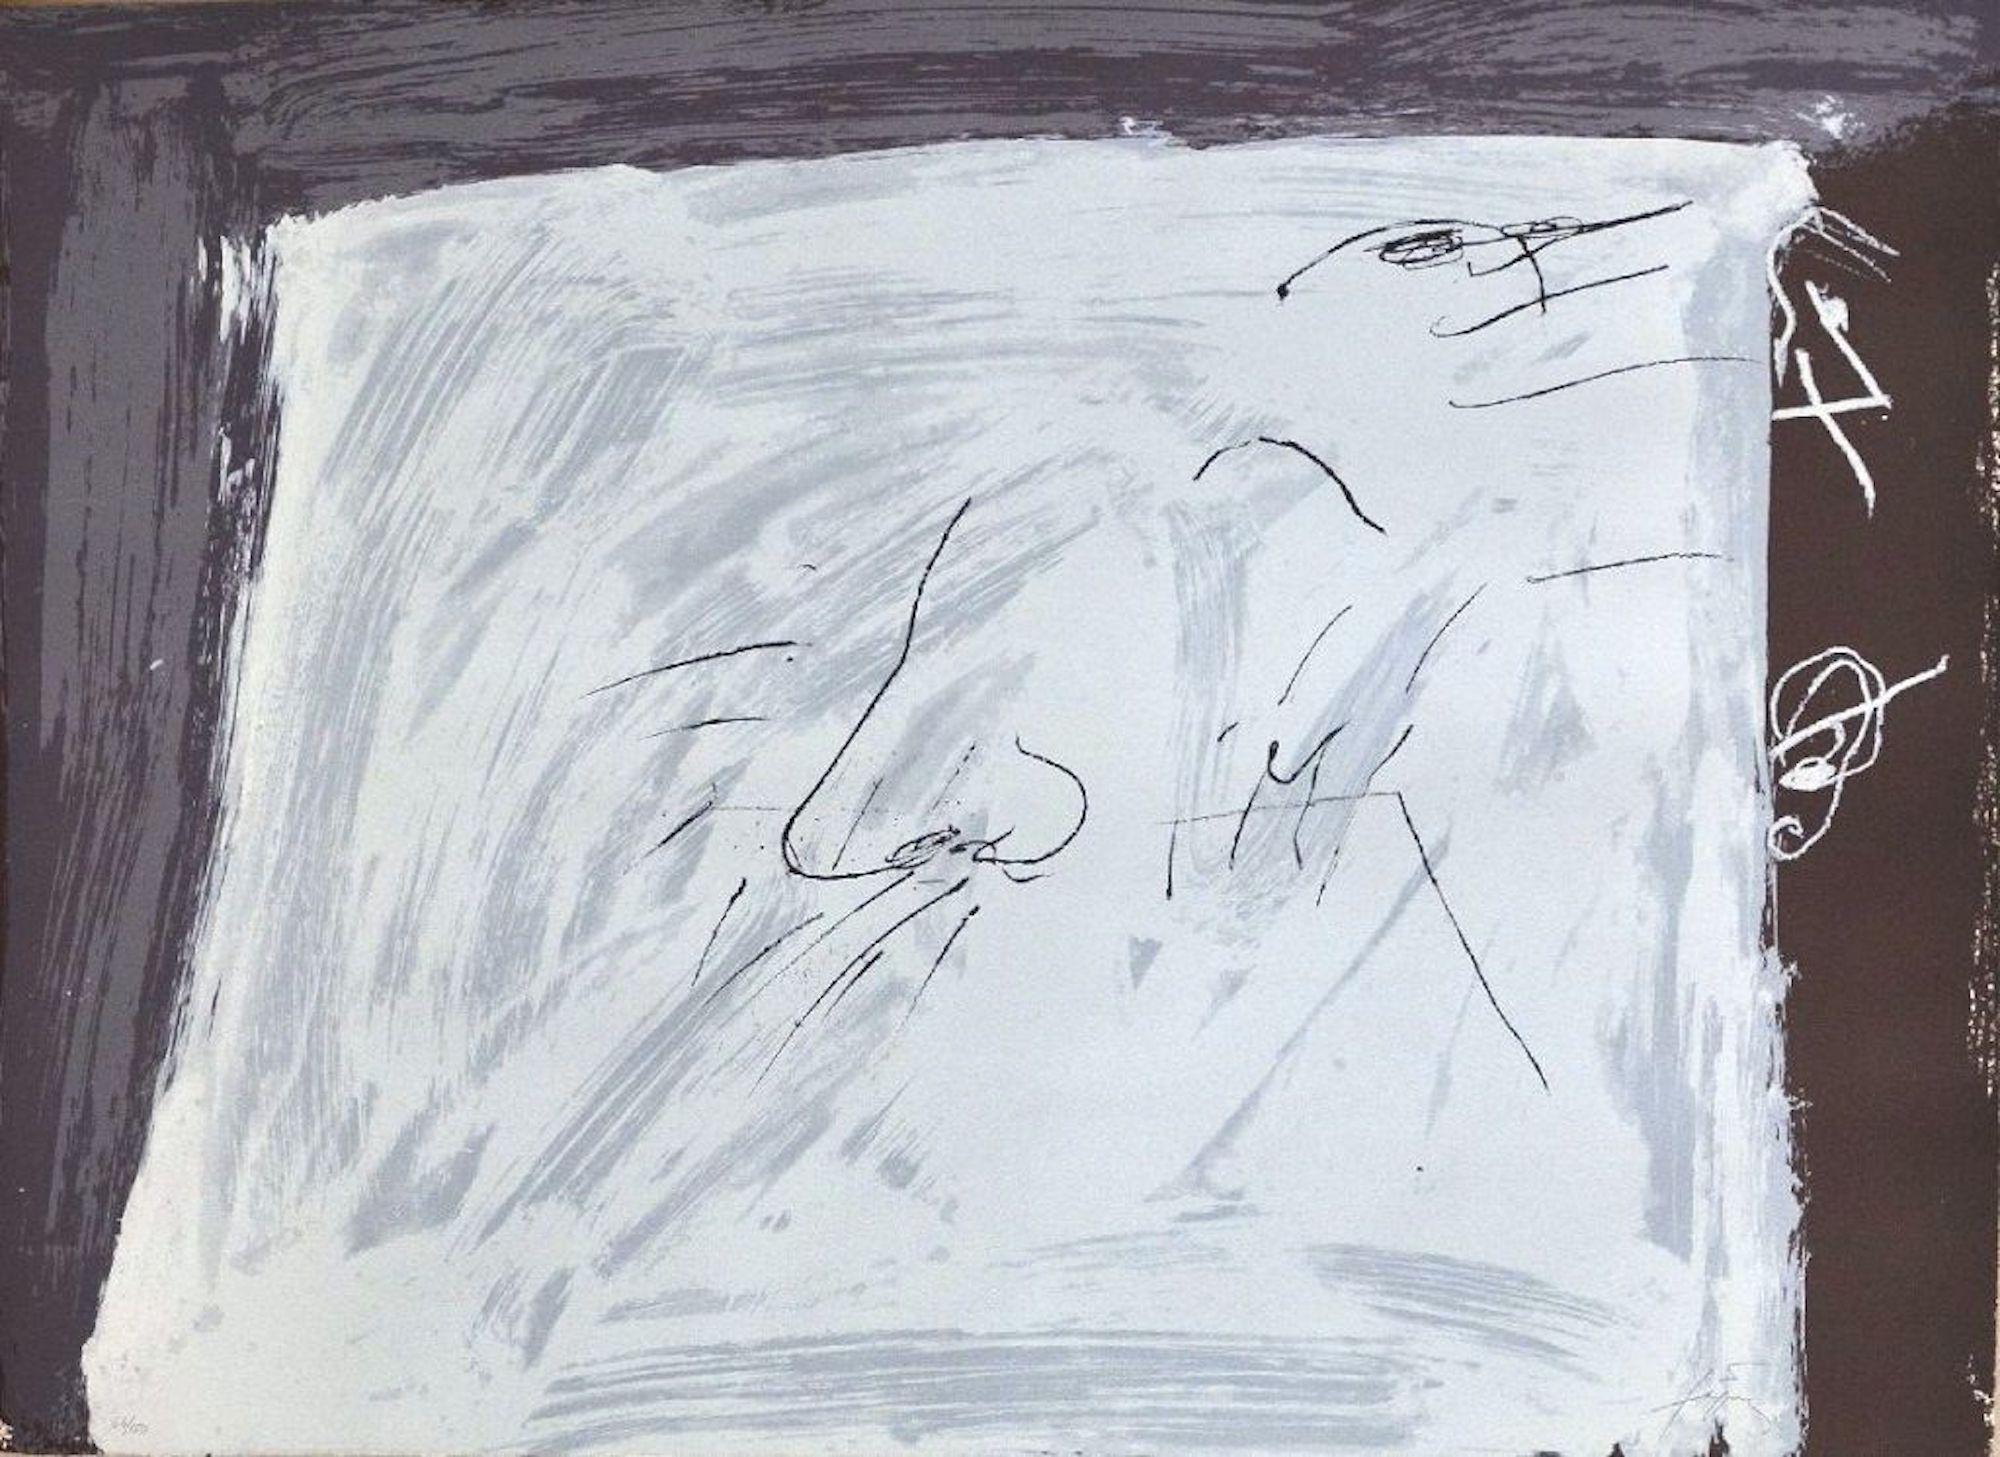 Antoni Tàpies Abstract Print - Untitled - Original Lithograph by Antoni Tapies - 1974